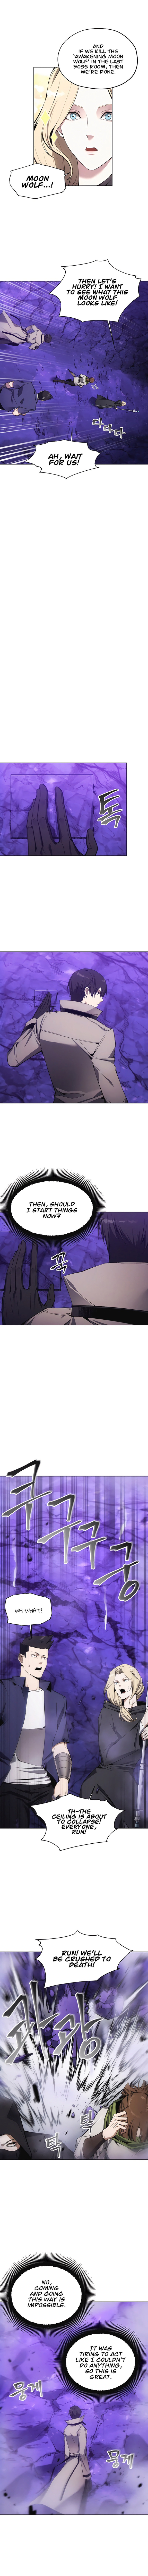 How to Live as a Villain - Chapter 10 Page 6